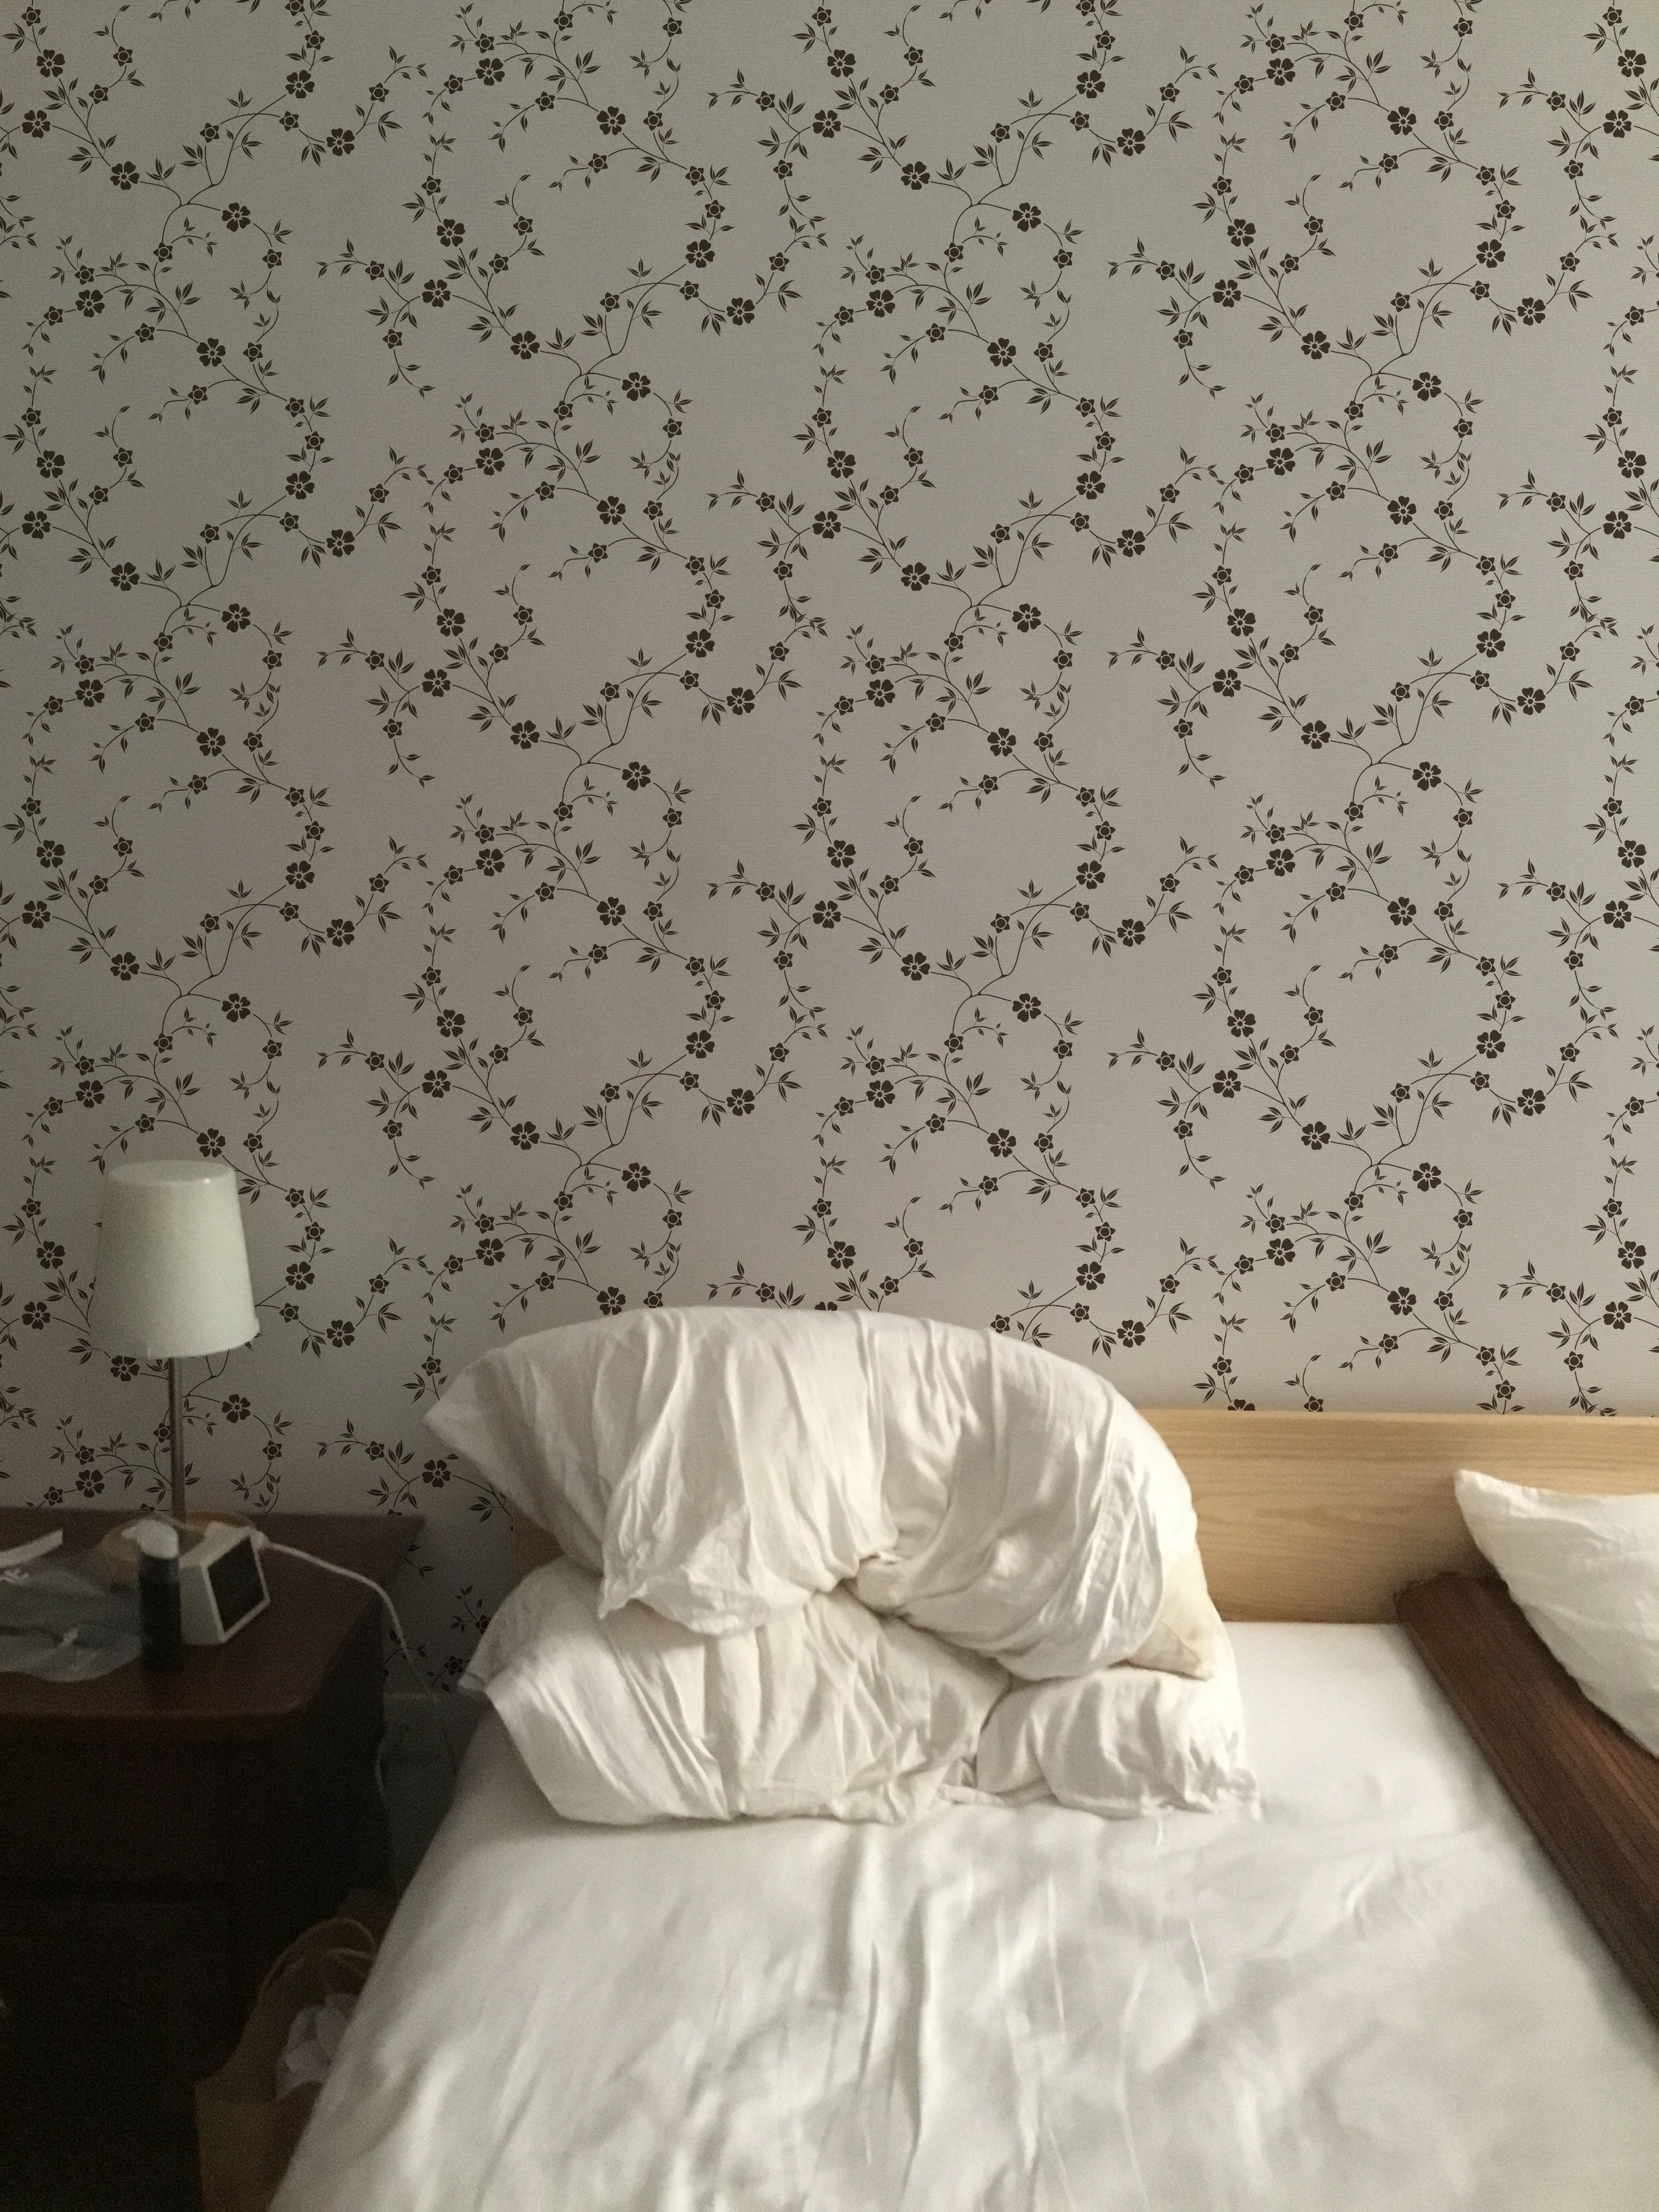 Transforming Rental Spaces: Temporary Wallpaper Solutions